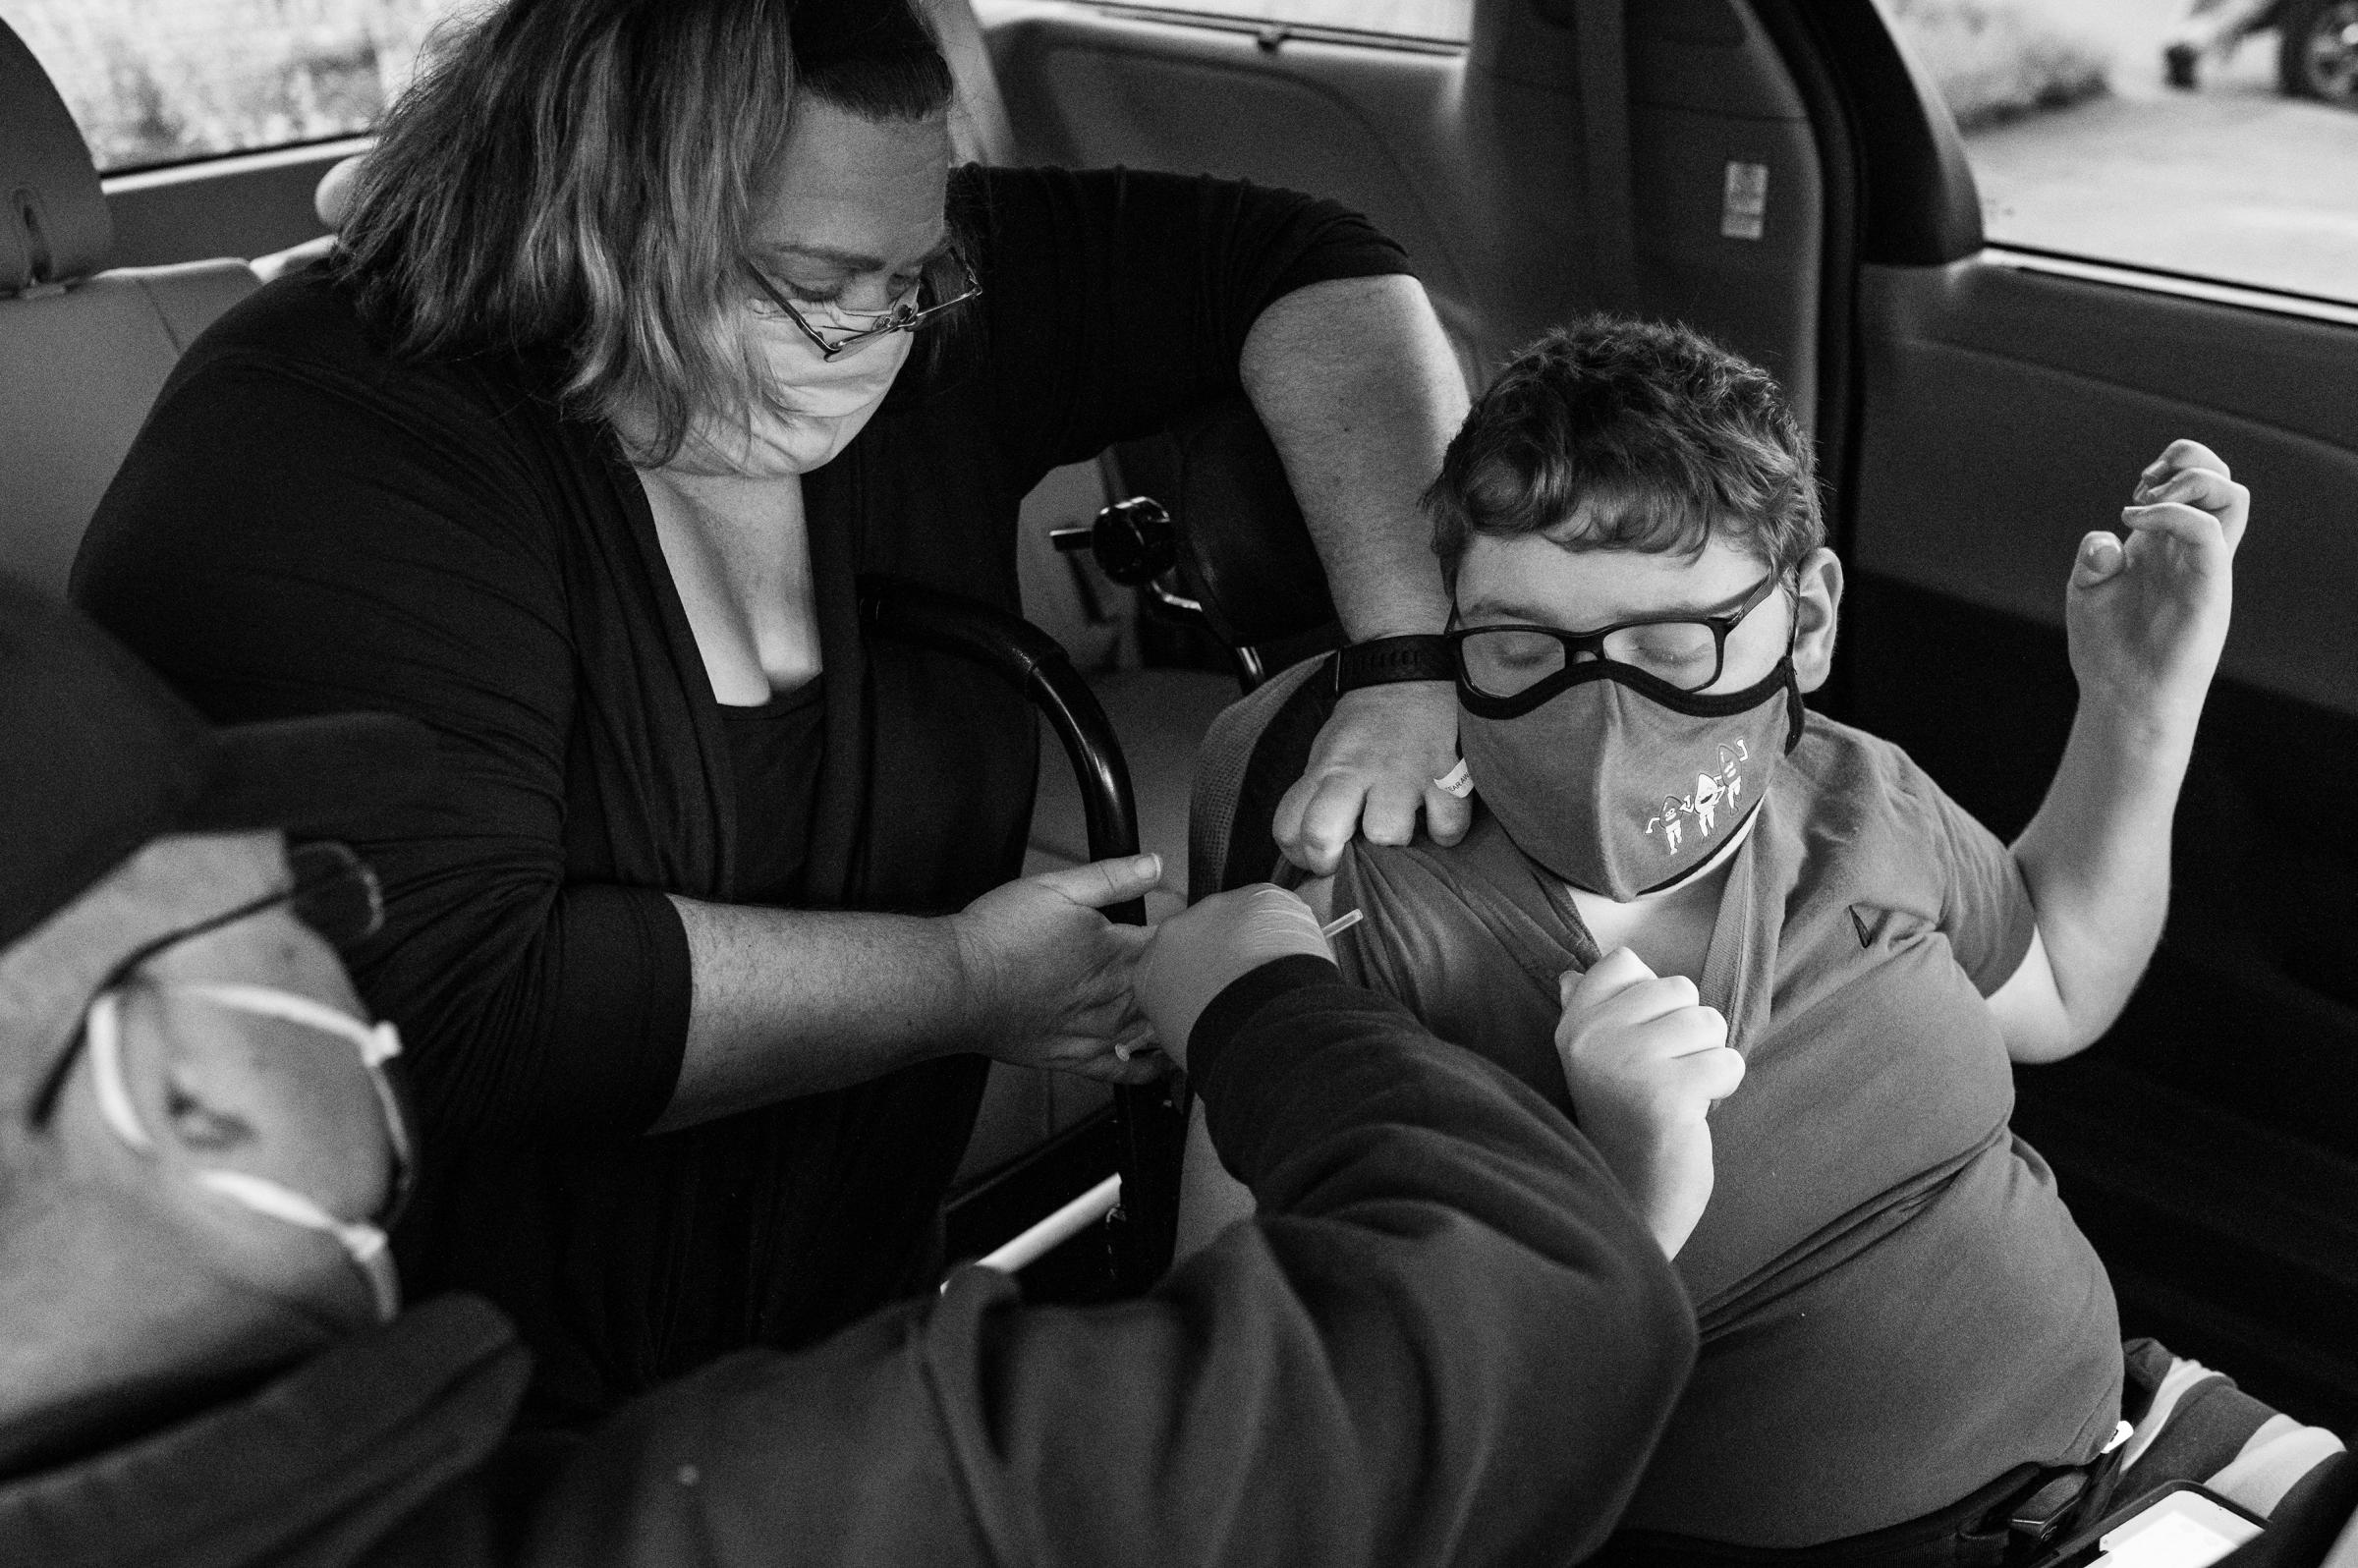 Allison Bungard of Charleston lifts the shirt of her son Andrew, 13, who has cerebral palsy and Factor V Leiden thrombophilia, while he receives his CoVid-19 vaccination at Bible Center Church on June 4, 2021 in Charleston, West Va.